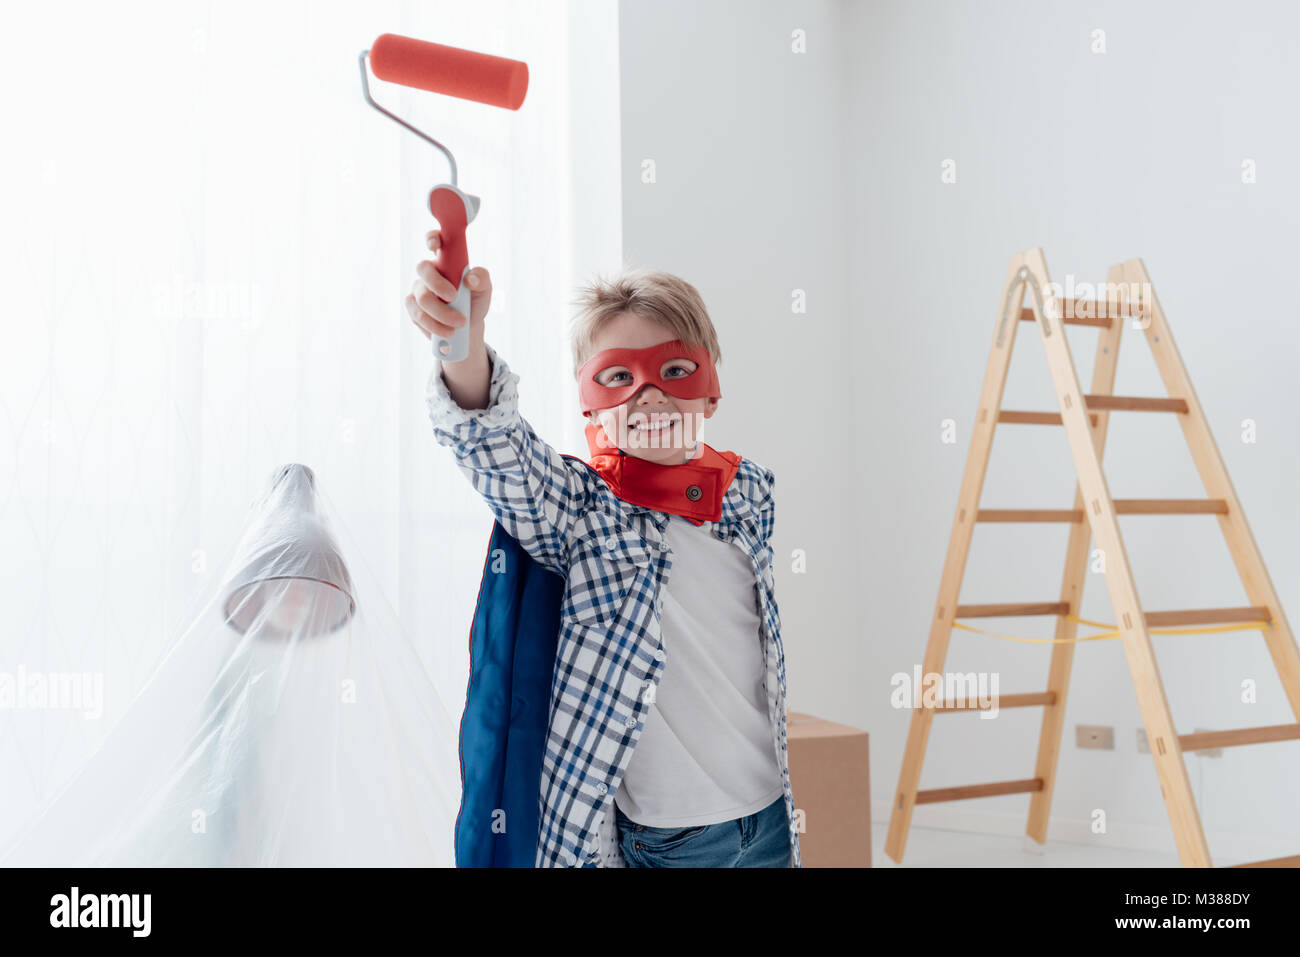 Cute superhero boy with mask and cape, he is holding a paint roller and smiling at camera, home renovation and diy concept Stock Photo